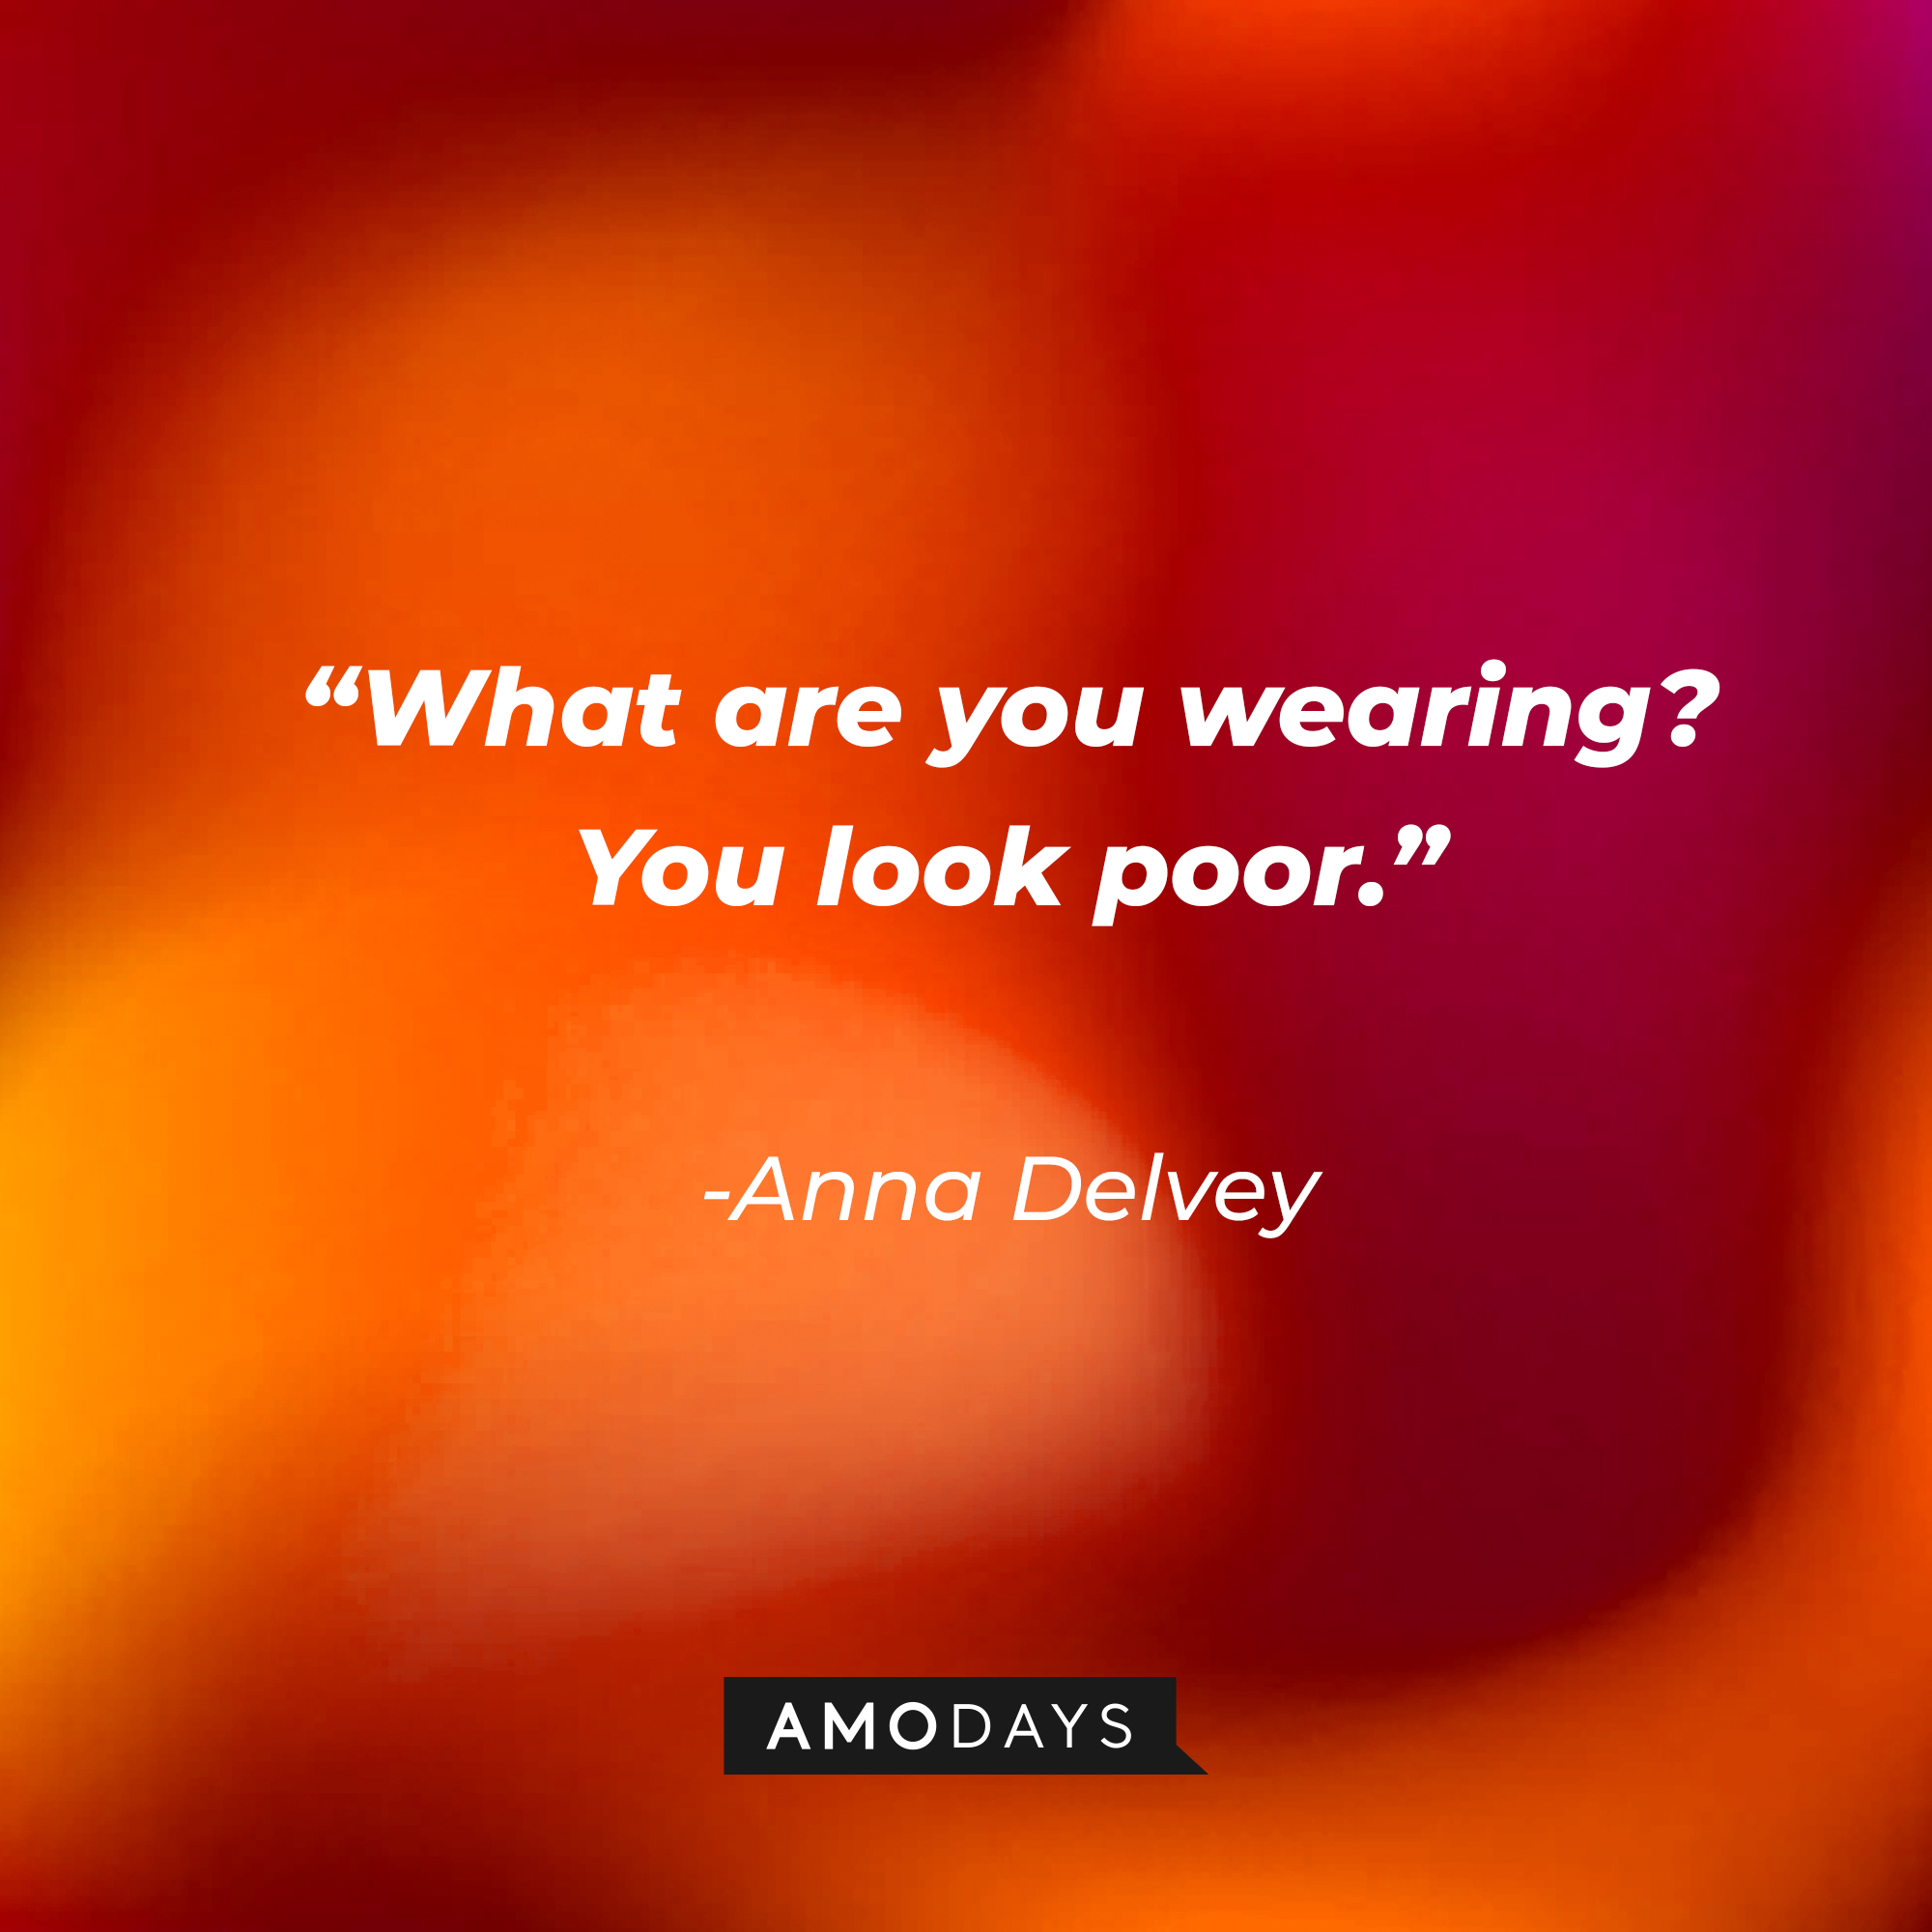 Julia Garner’s portrayal/version of Anna Delvey’s quote: “What are you wearing? You look poor.” | Source: AmoDays